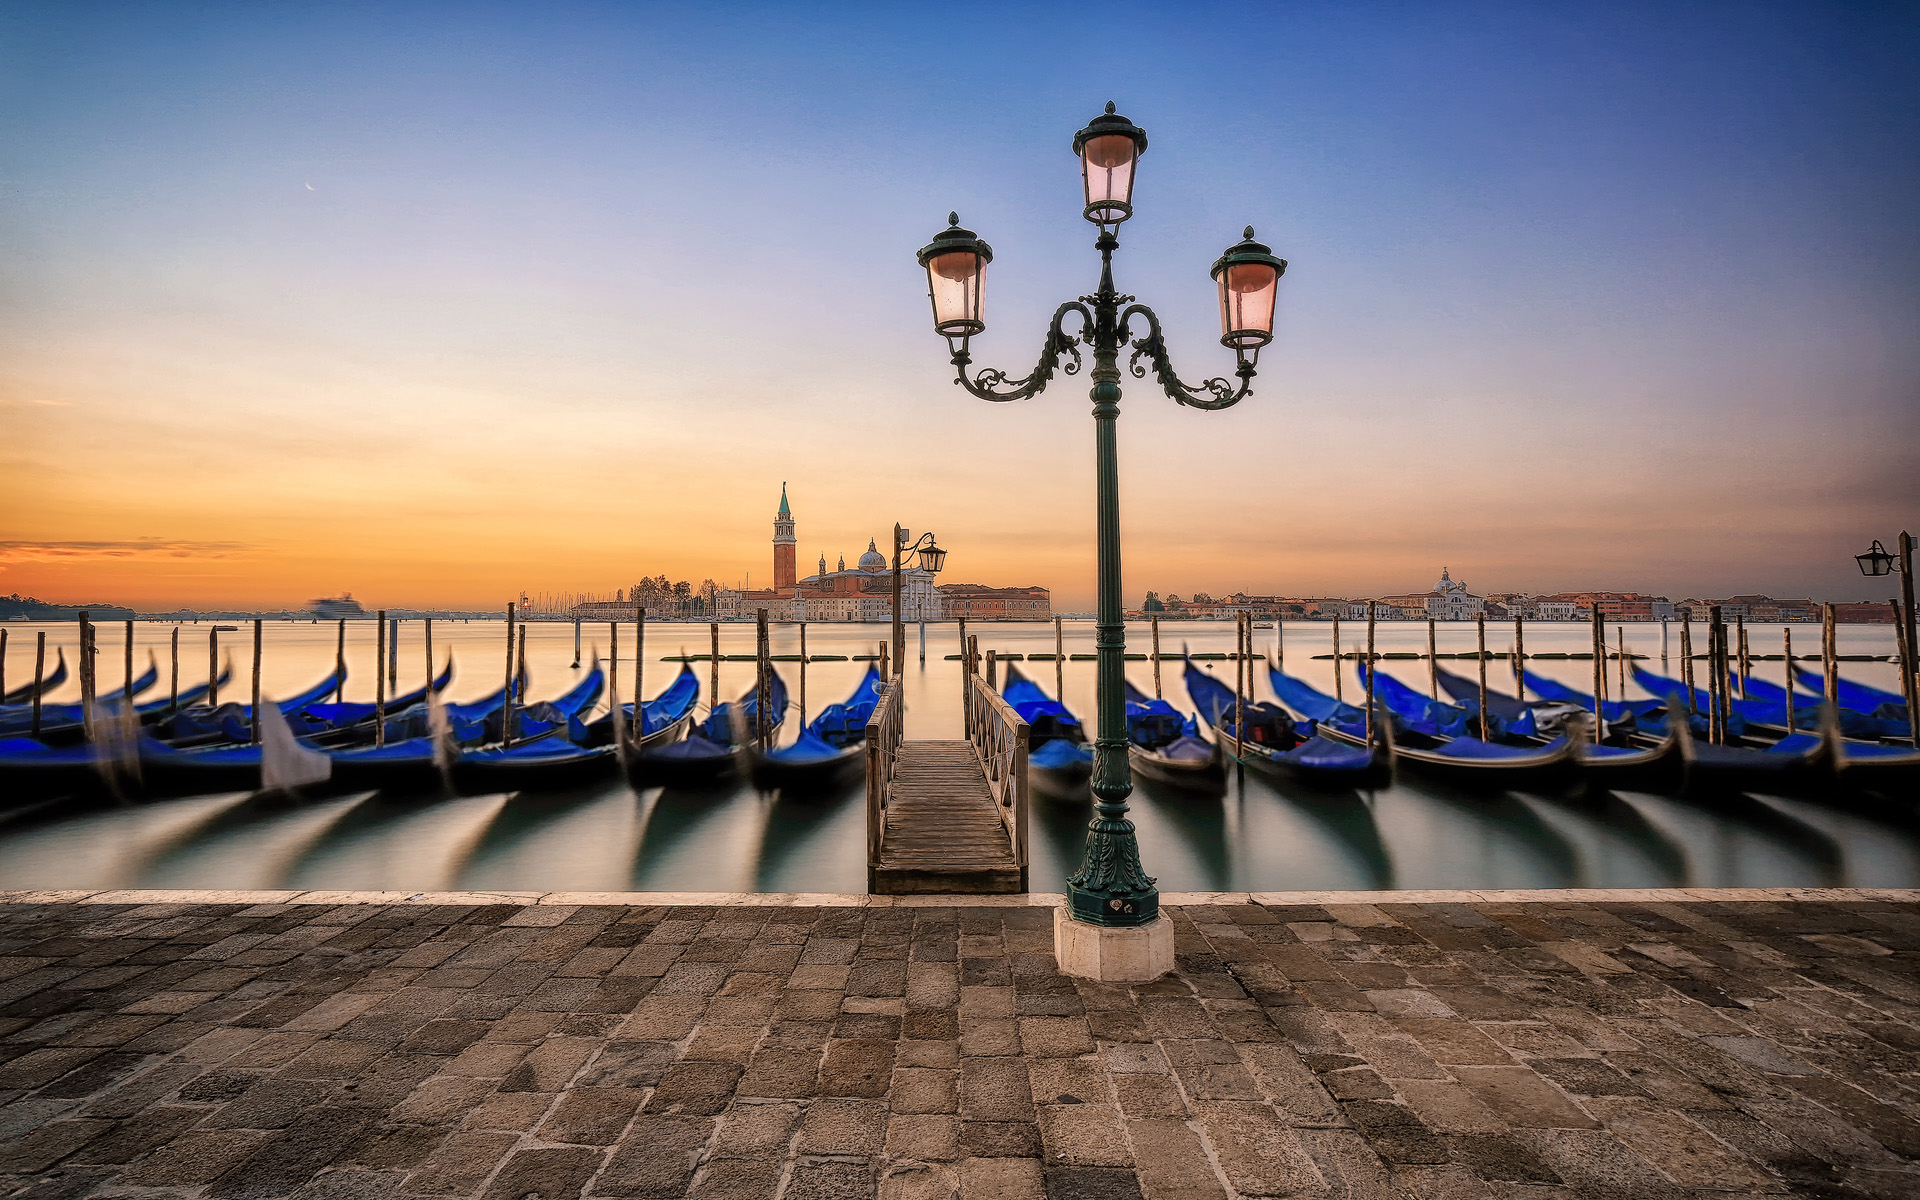 venice, man made, boat, canal, gondola, italy, lamp post, sunset, cities lock screen backgrounds